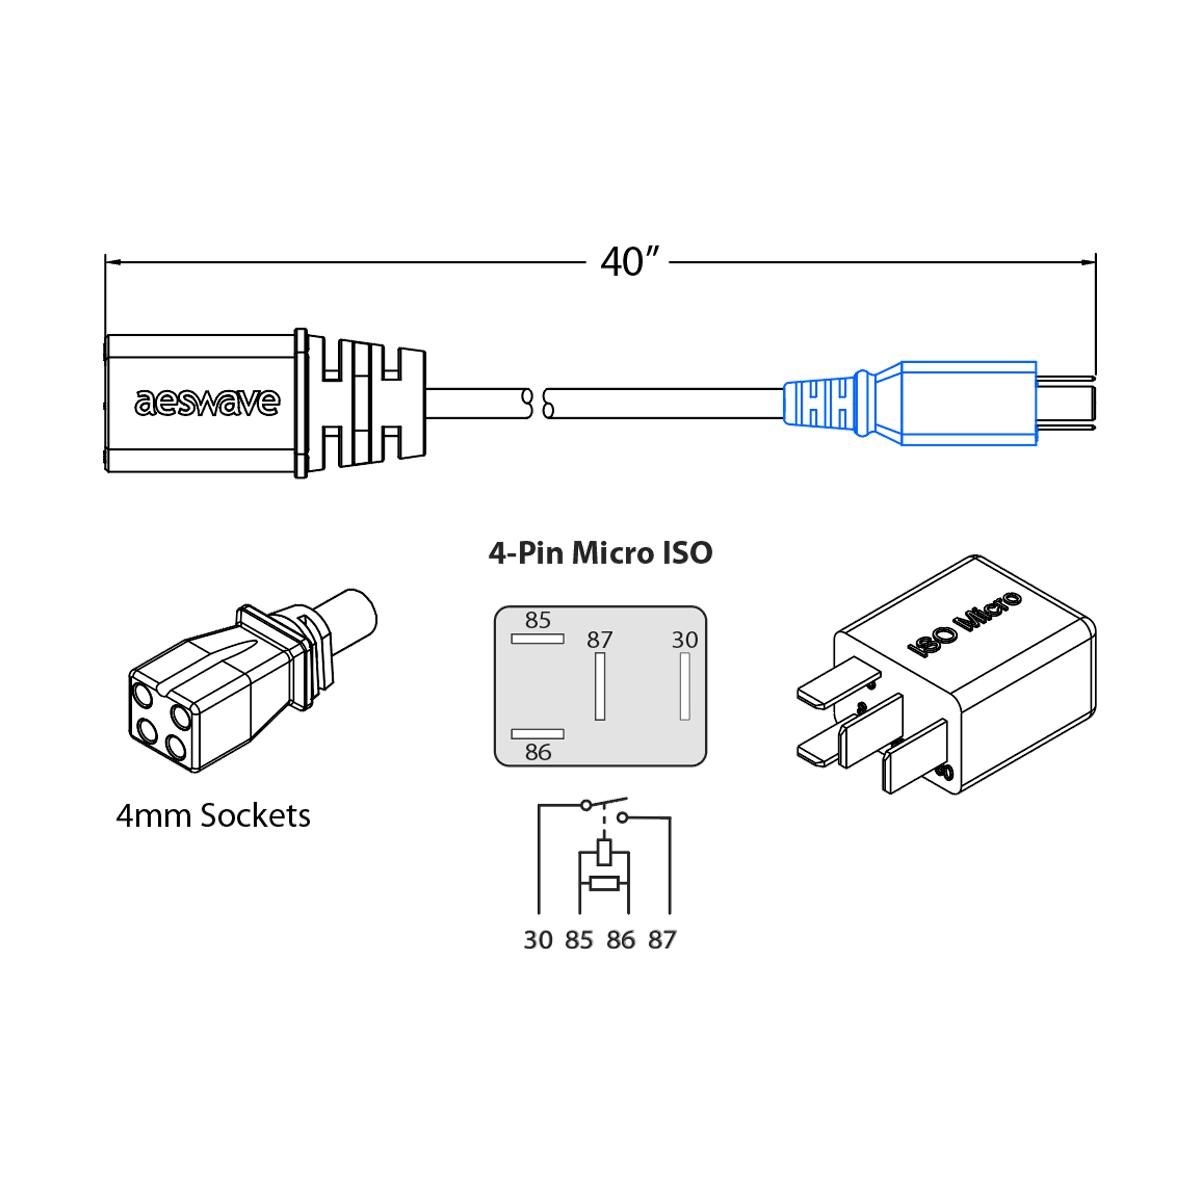 uActivate 4-Pin ISO Micro Specifcations